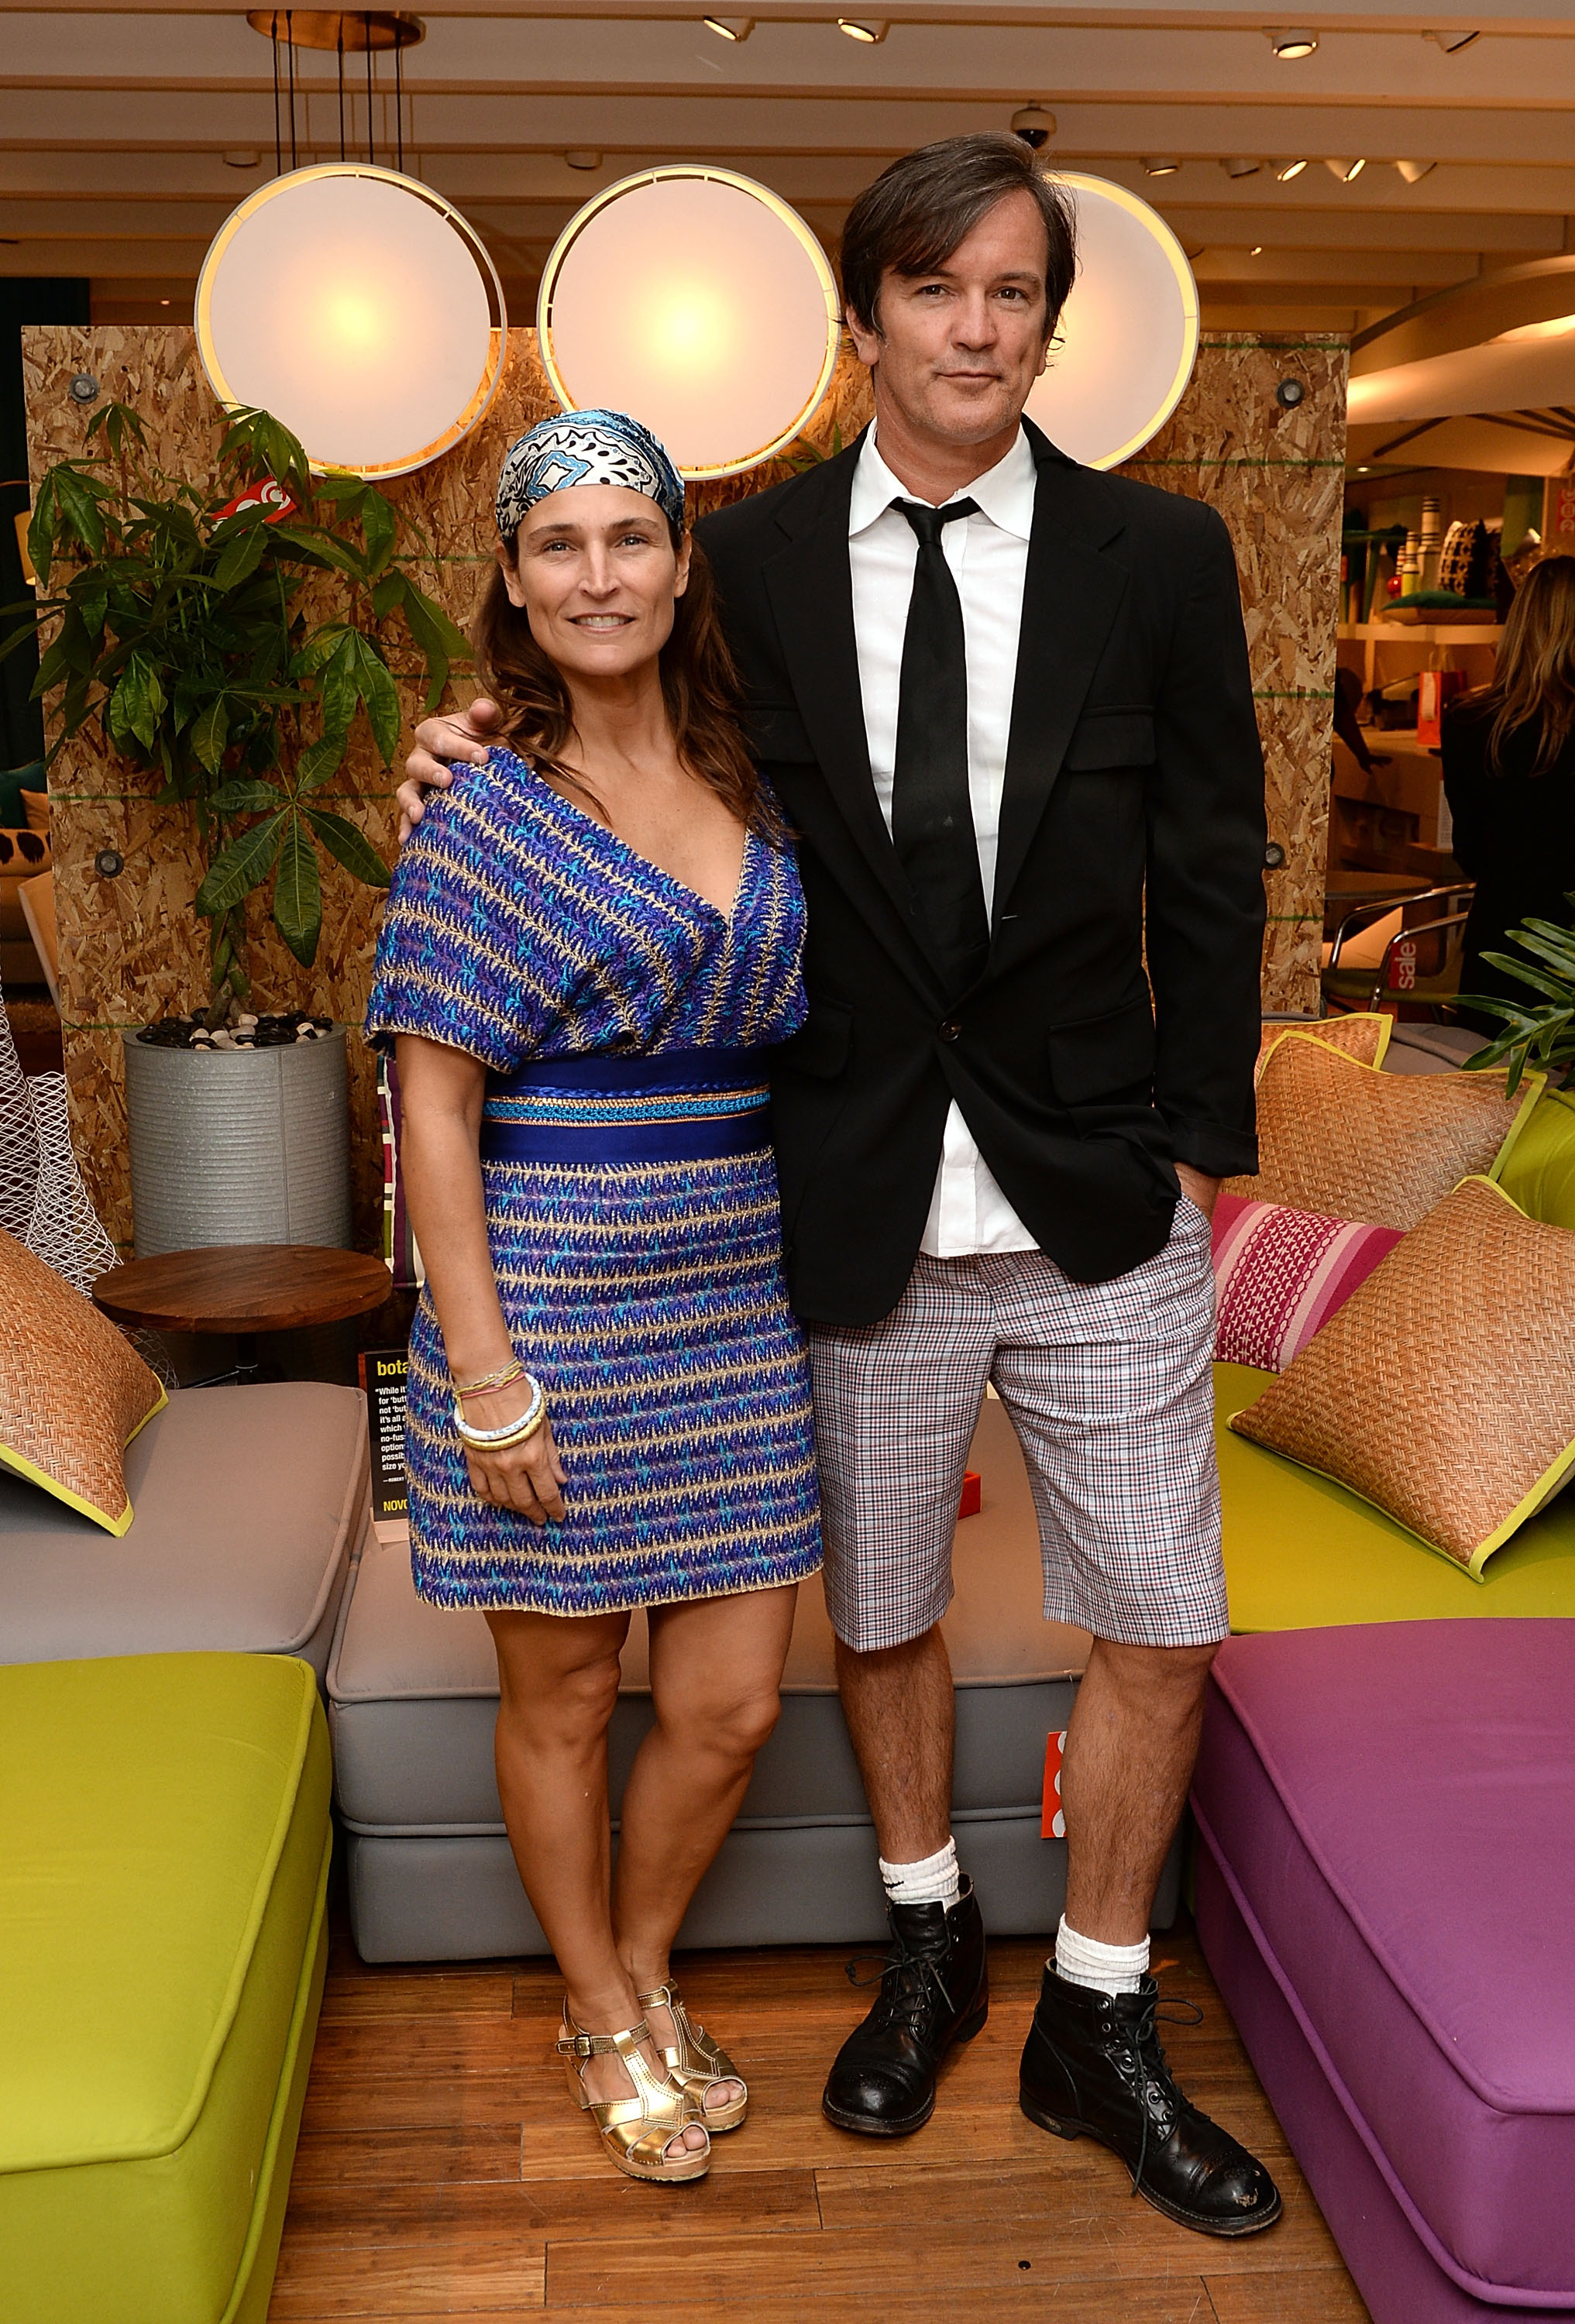 NEW YORK, NY - MAY 02:  Cortney Novogratz and Robert Novogratz attend the CB2 celebration for the launch of the Novogratz Brasil Collection at CB2 Soho Store on May 2, 2013 in New York City.  (Photo by Andrew H. Walker/Getty Images for CB2)